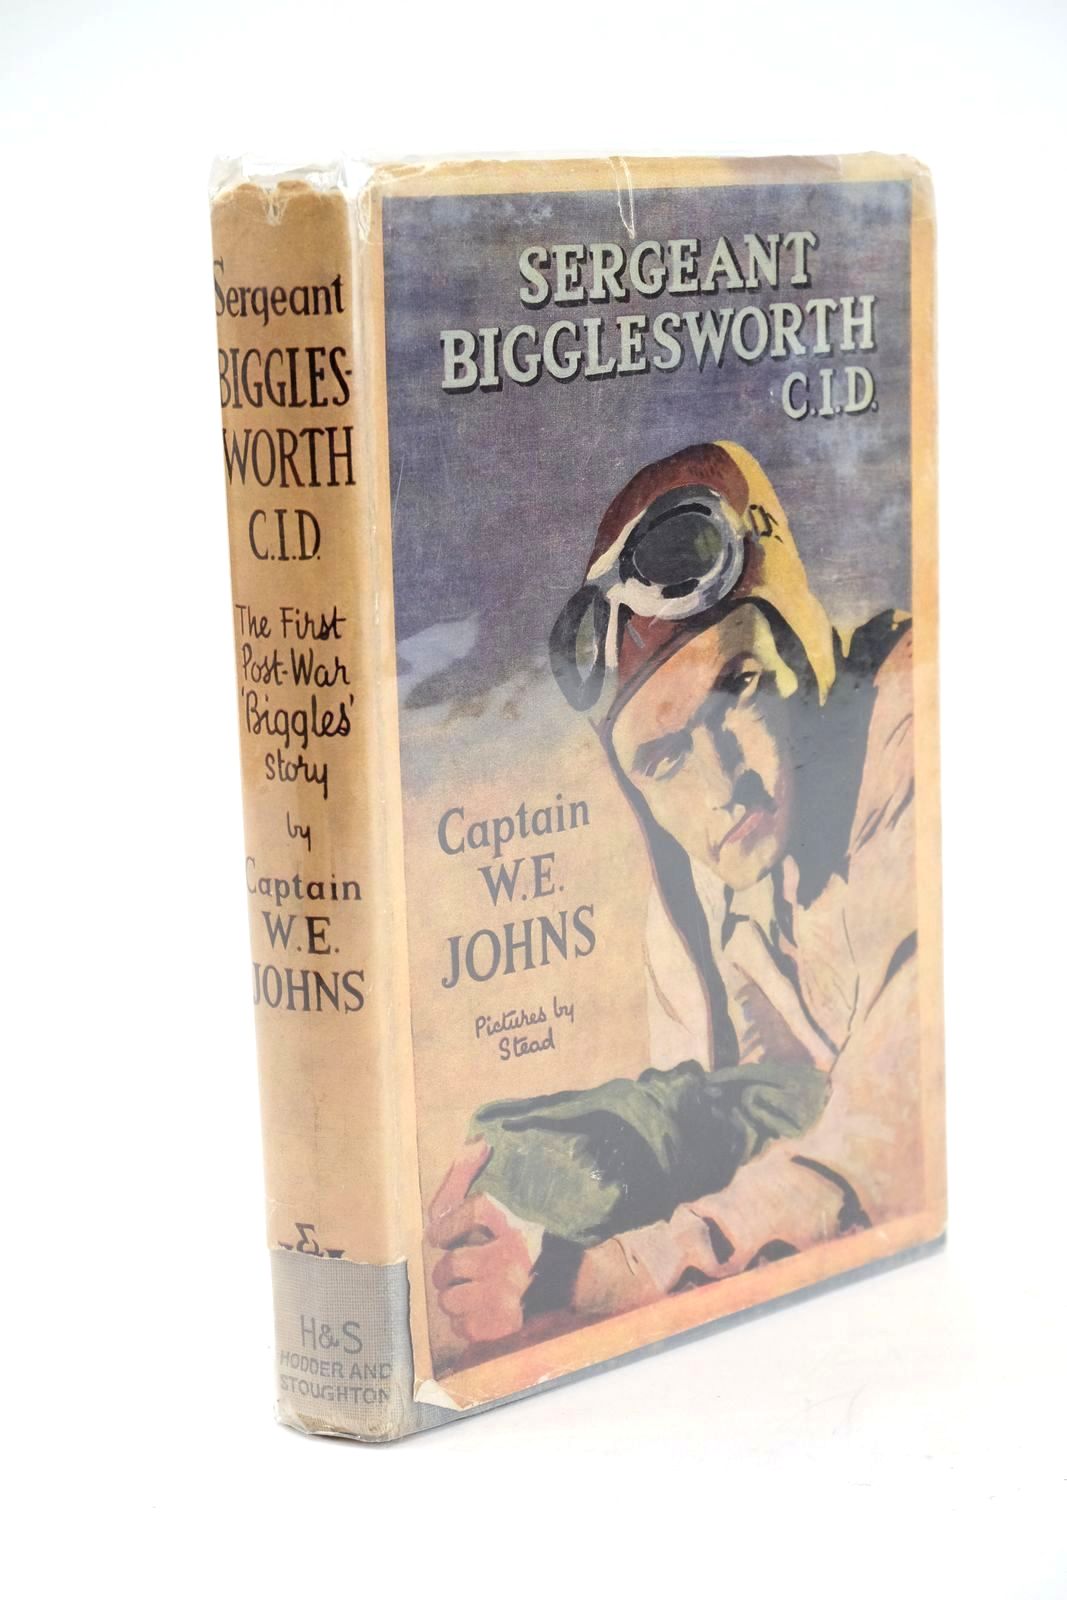 Photo of SERGEANT BIGGLESWORTH C.I.D. written by Johns, W.E. illustrated by Stead, Leslie published by Hodder & Stoughton (STOCK CODE: 1324026)  for sale by Stella & Rose's Books